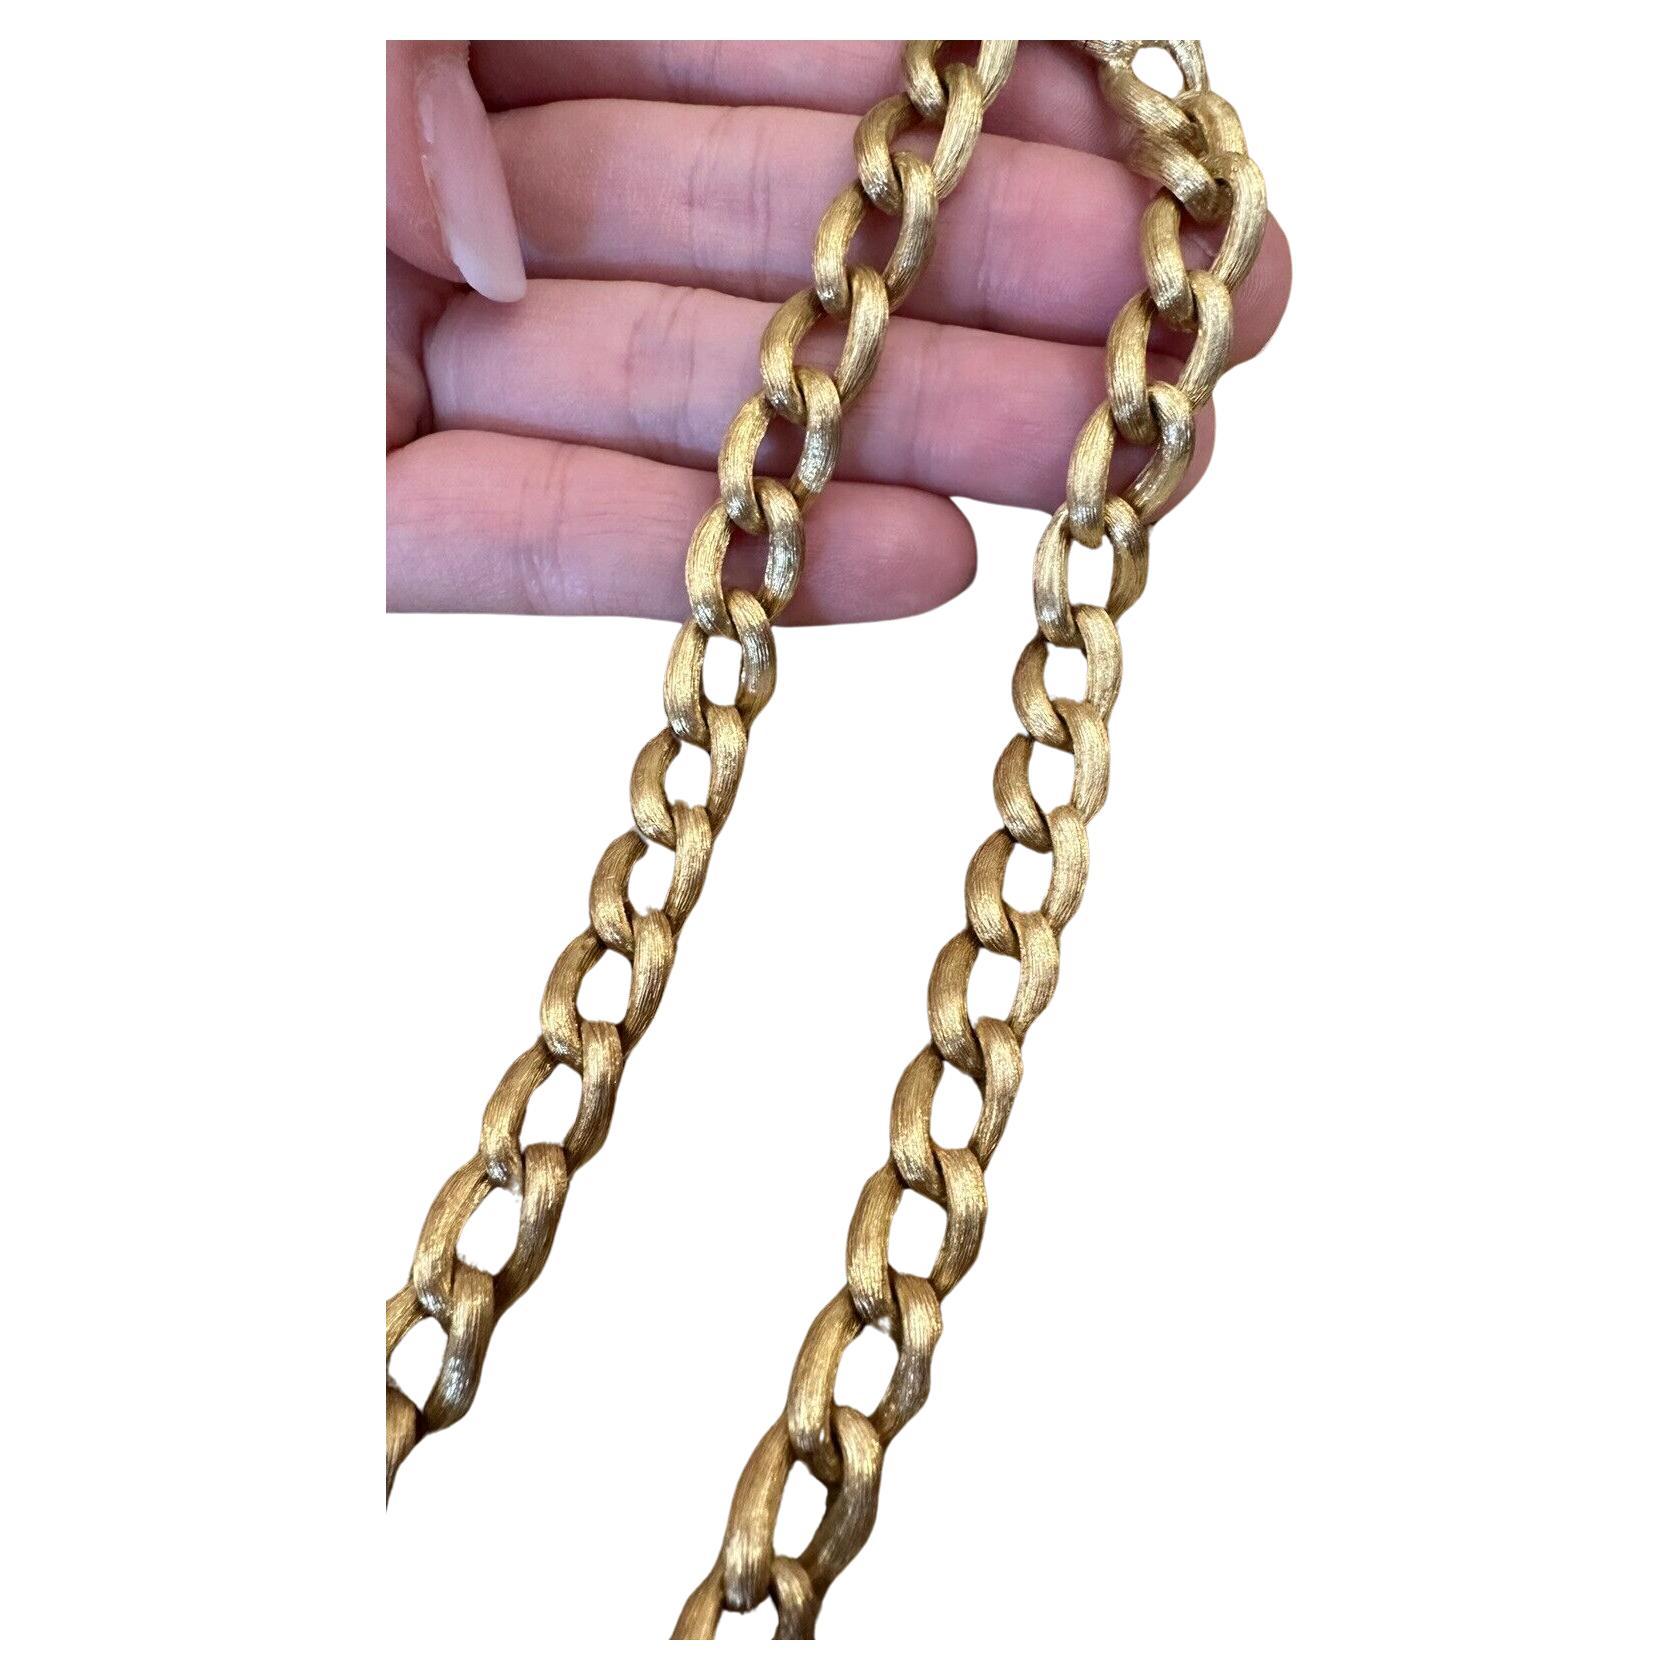 Henry Dunay 'Sabi' Diamond Curb Link Necklace in 18k Yellow Gold

Henry Dunay 'Sabi' Diamond Curb Link Necklace features 11 Pavé diamonds curb links in the front in 18k Yellow Gold. The rest of the links have a signature Dunay brushed finish